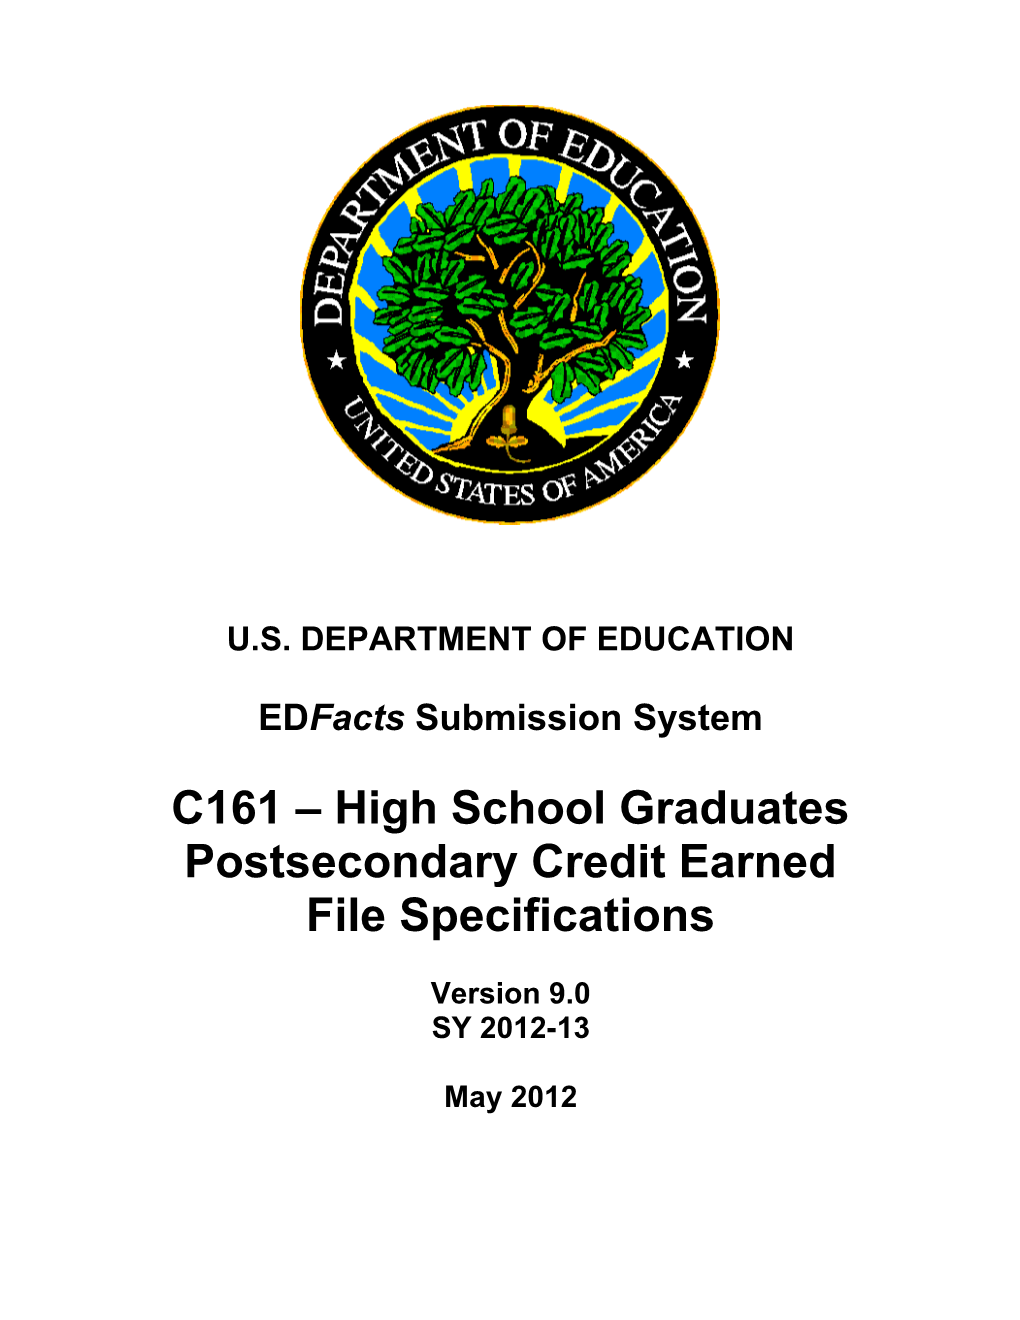 High School Graduates Postsecondary Credits Earned File Specifications